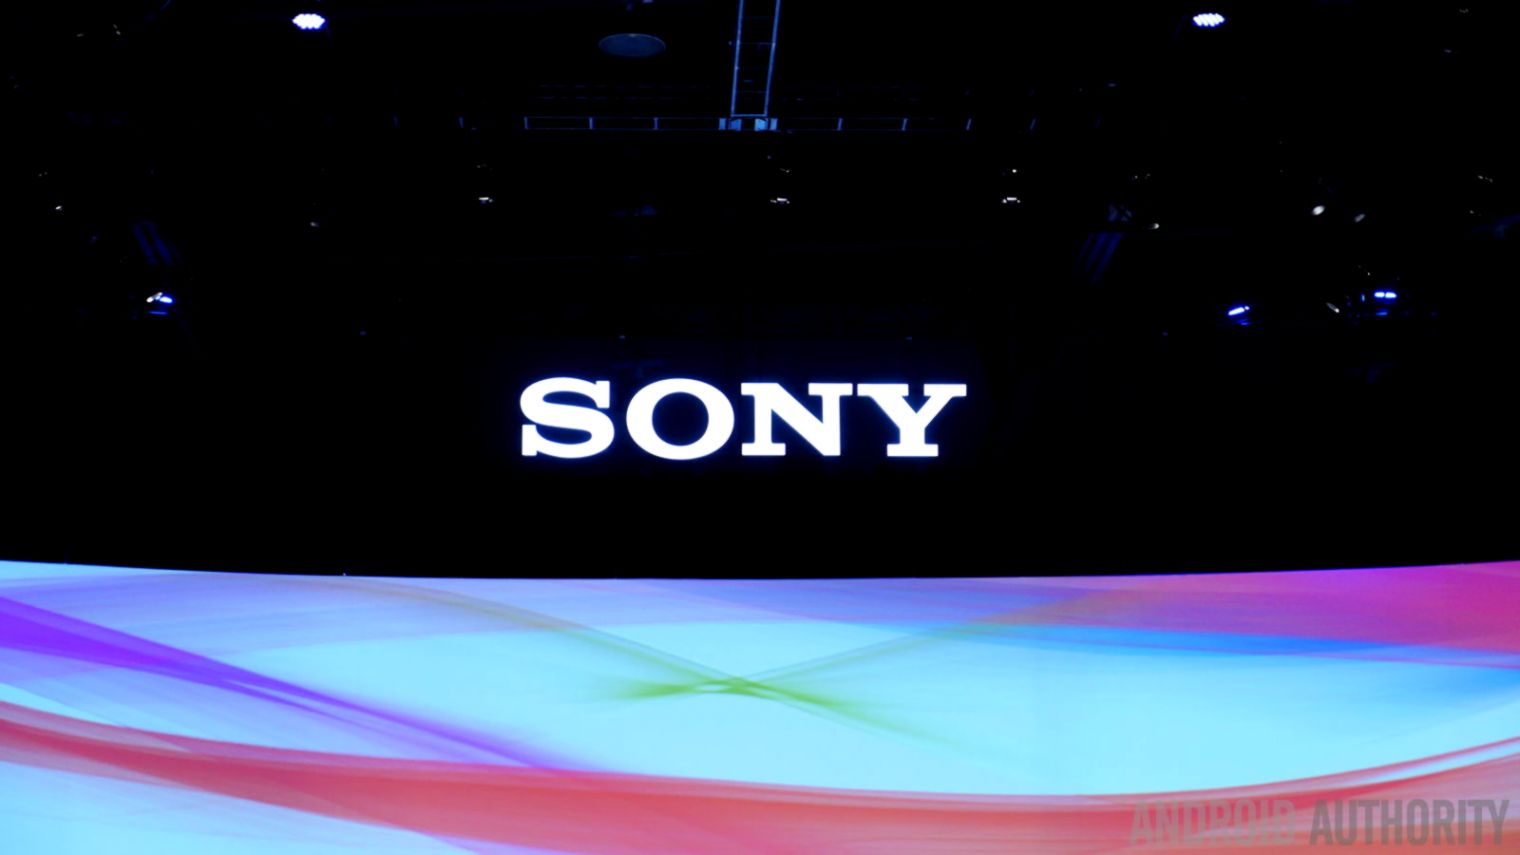 Sony Xperia Images Leak Is This Really The Xperia Z3 Sony Hd Logo 15x855 Wallpaper Teahub Io